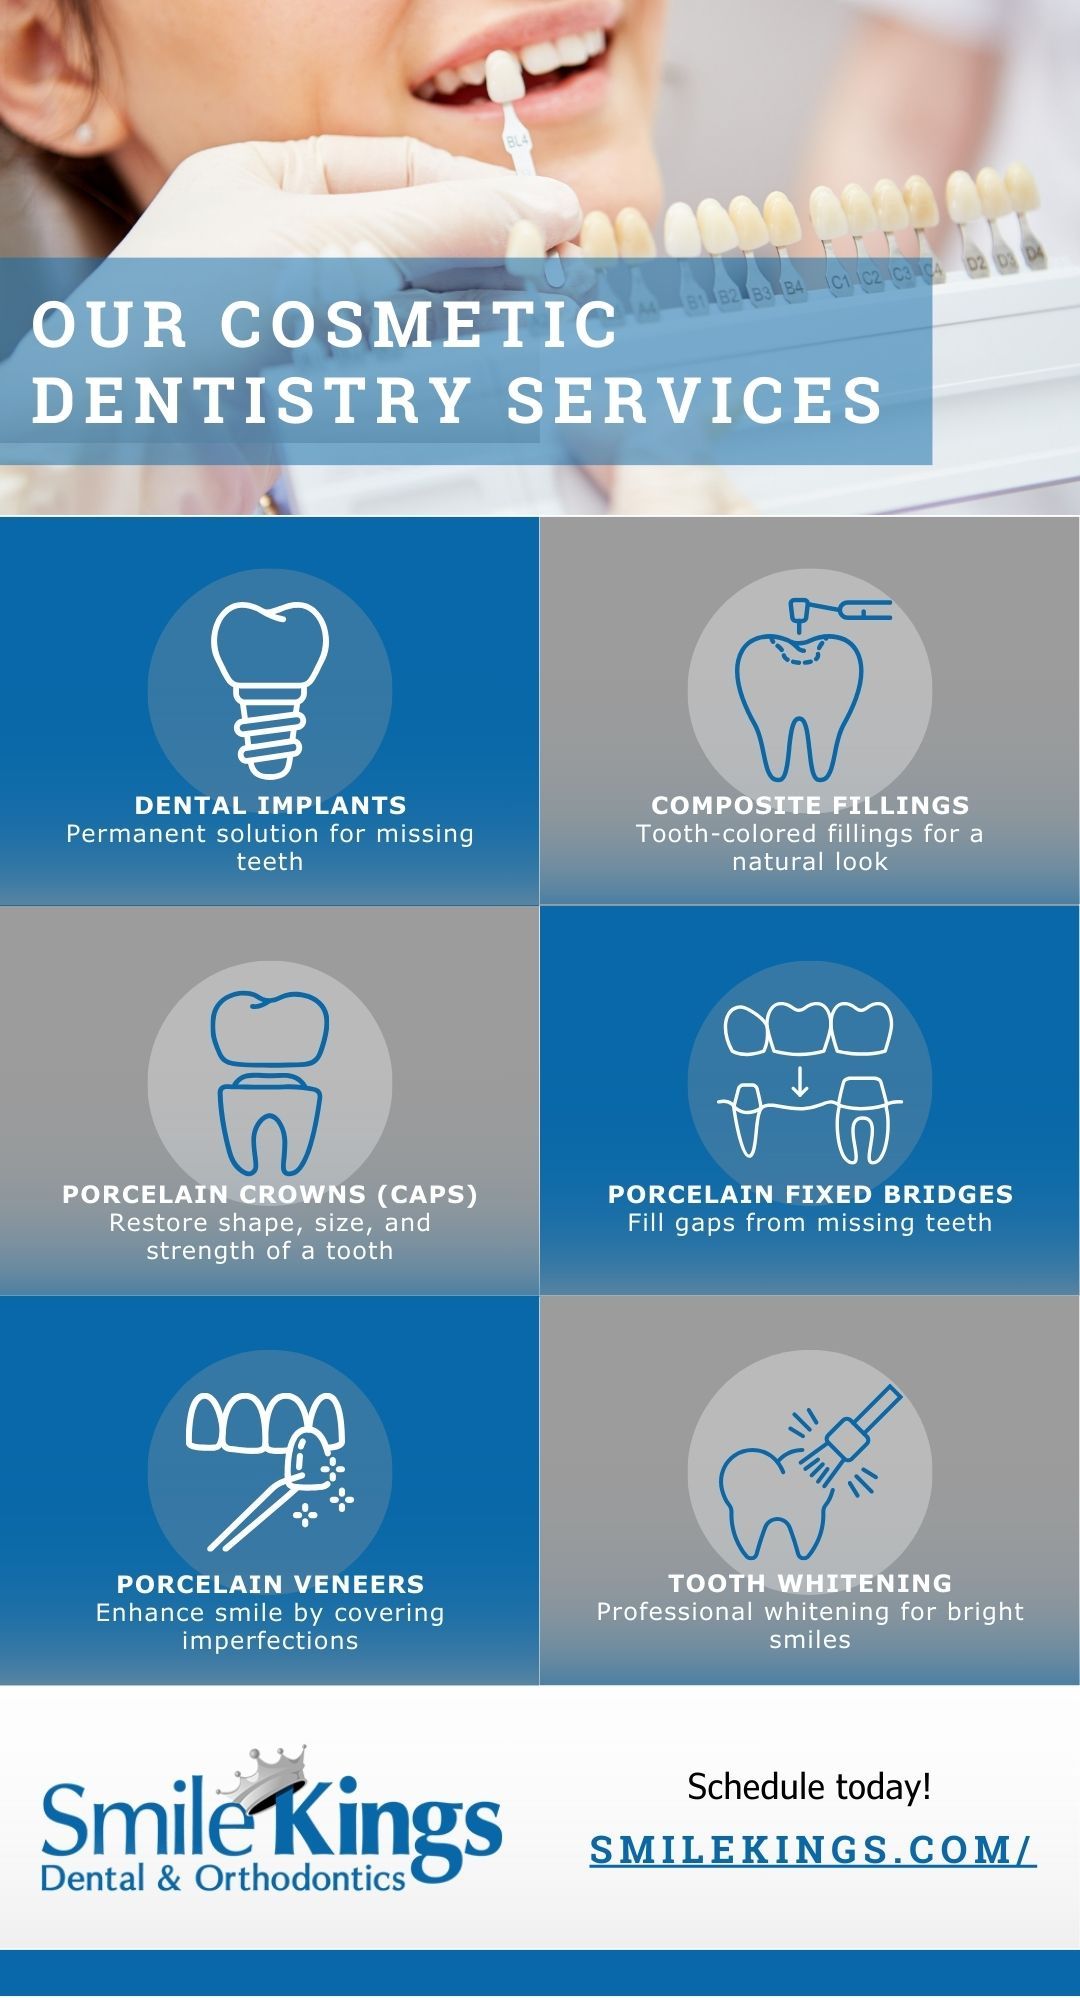 M38685 - Infographic - Our Cosmetic Dentistry Services.jpg